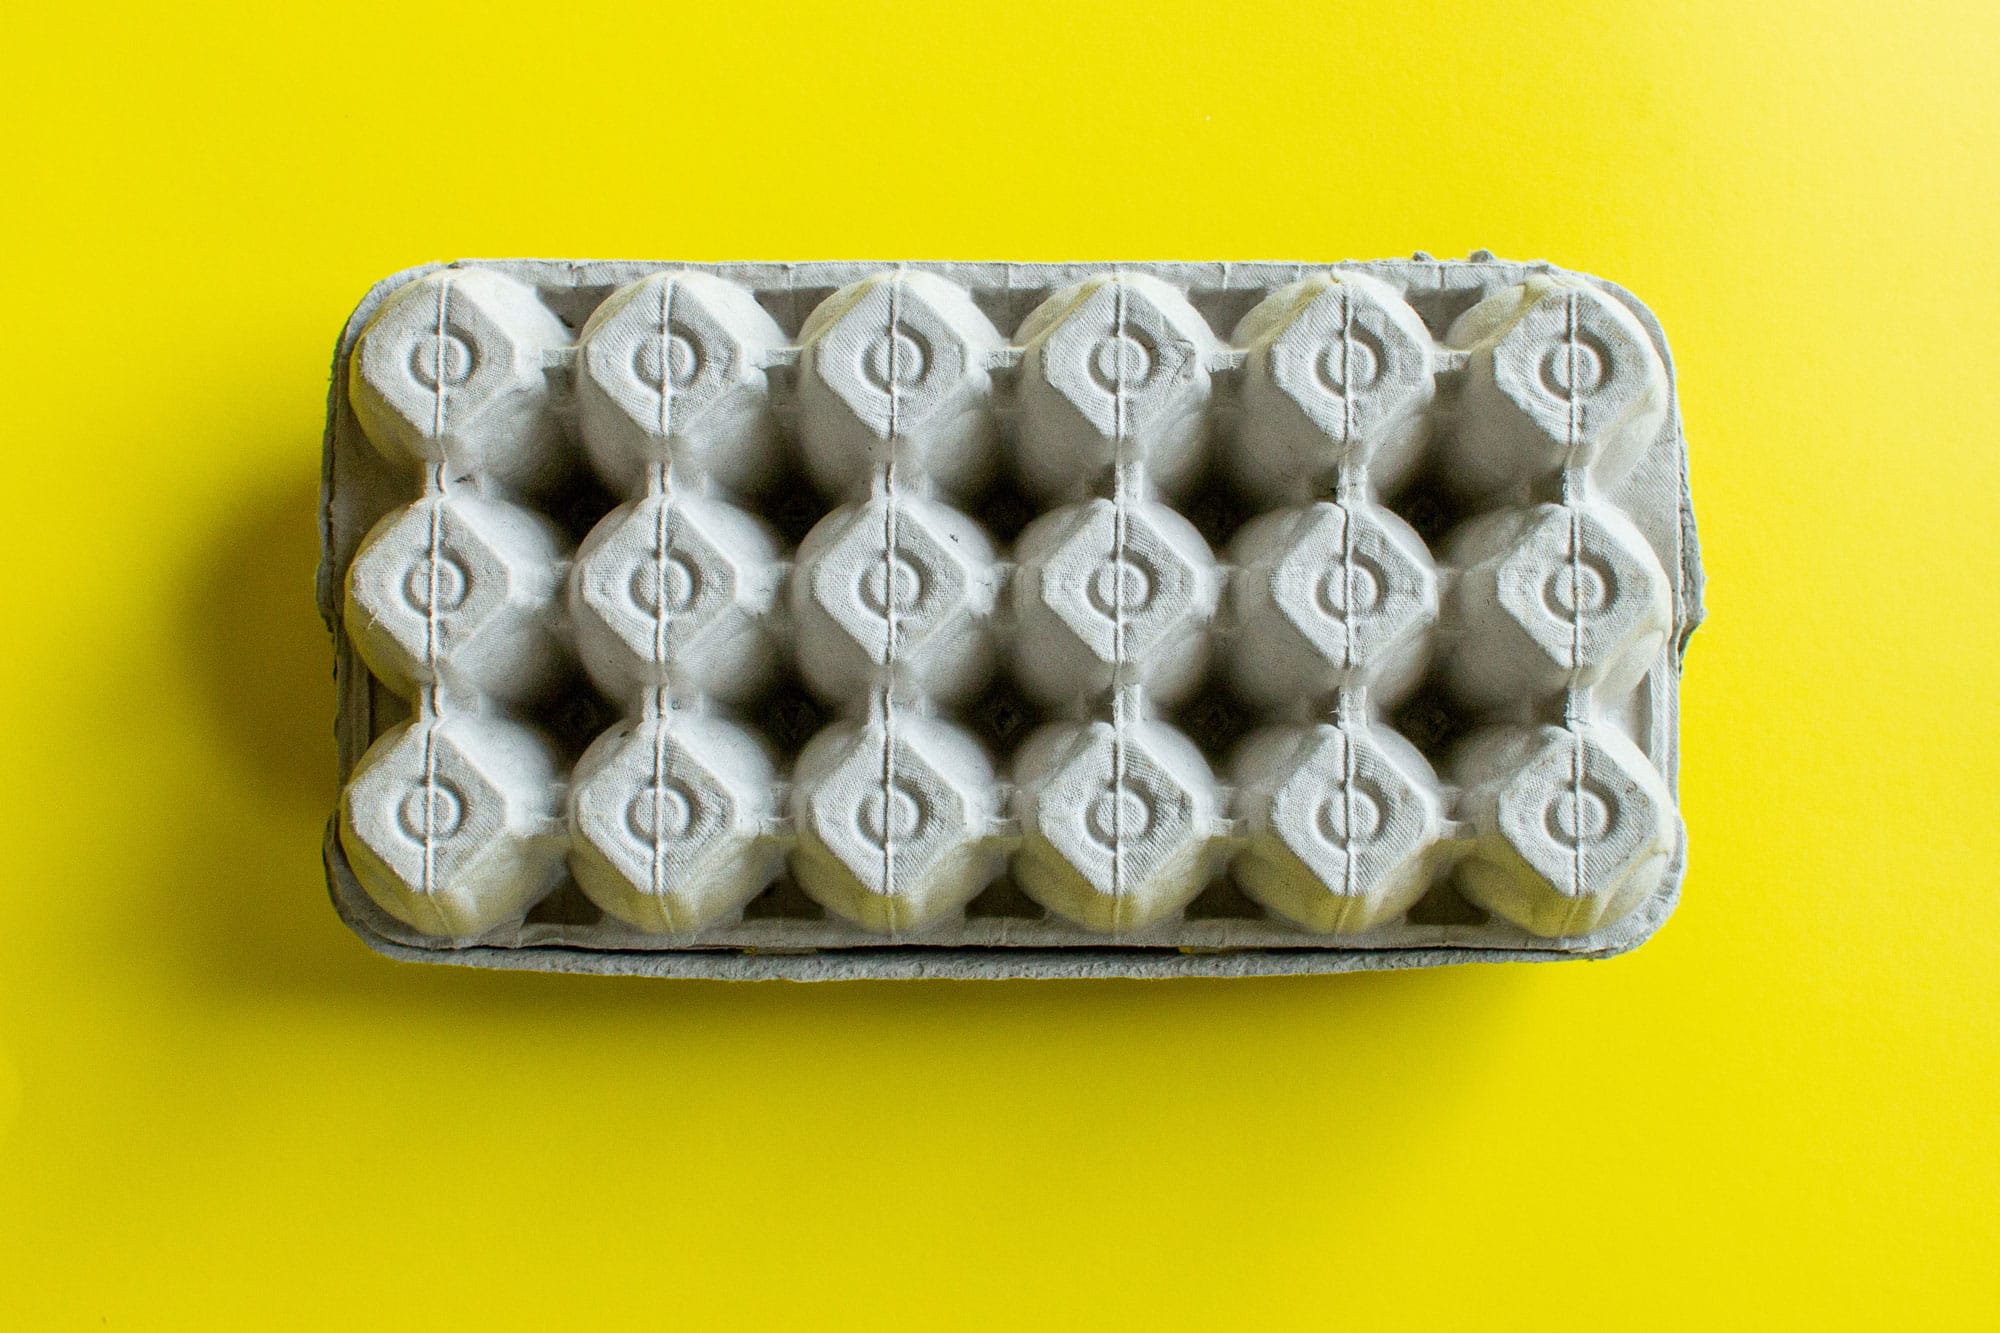 Image showcasing an 18-count package of white eggs yellow background , highlighting Eggs Unlimited's ability to offer safe packaging and delivery options in 18-egg configurations or any other requested sizes. The image serves to reassure customers of Eggs Unlimited's commitment to flexibility and care in meeting their specific egg packaging and shipping needs.